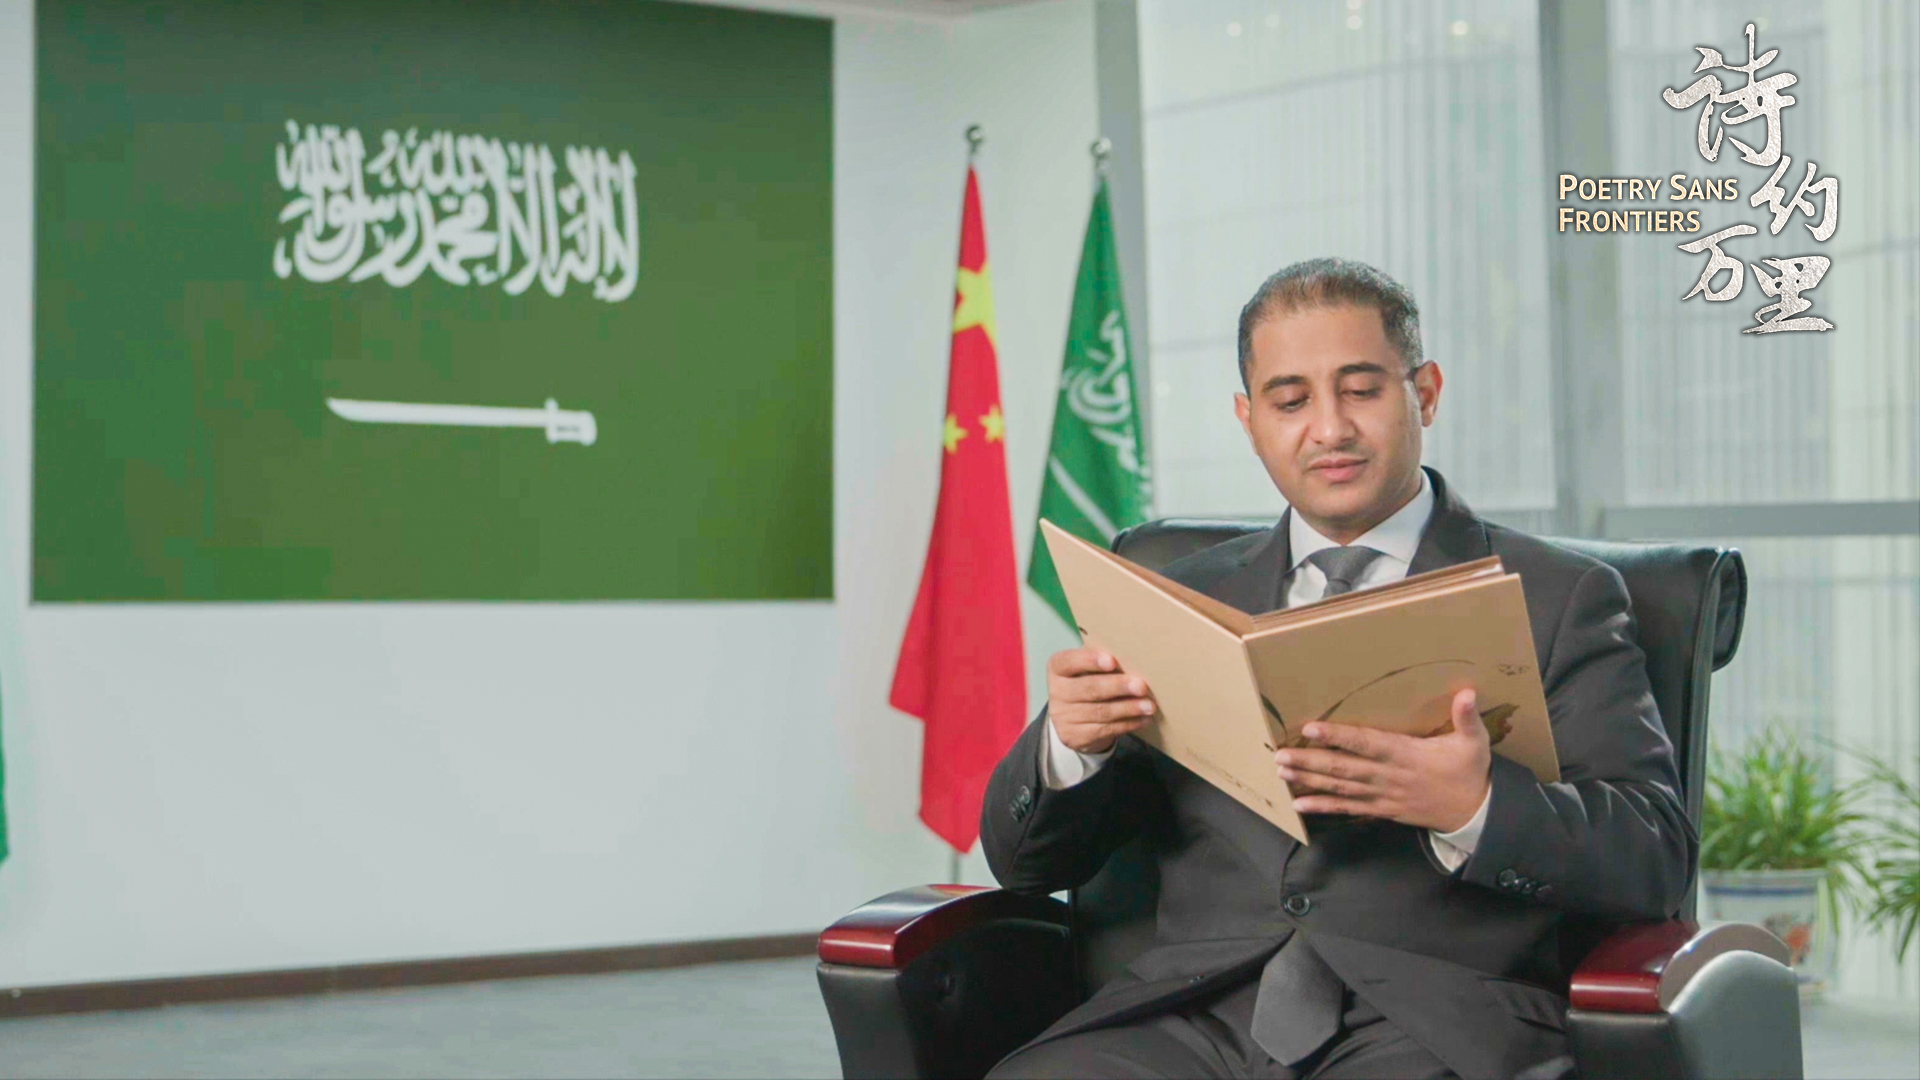 Saudi cultural counselor in China shares poem on peace